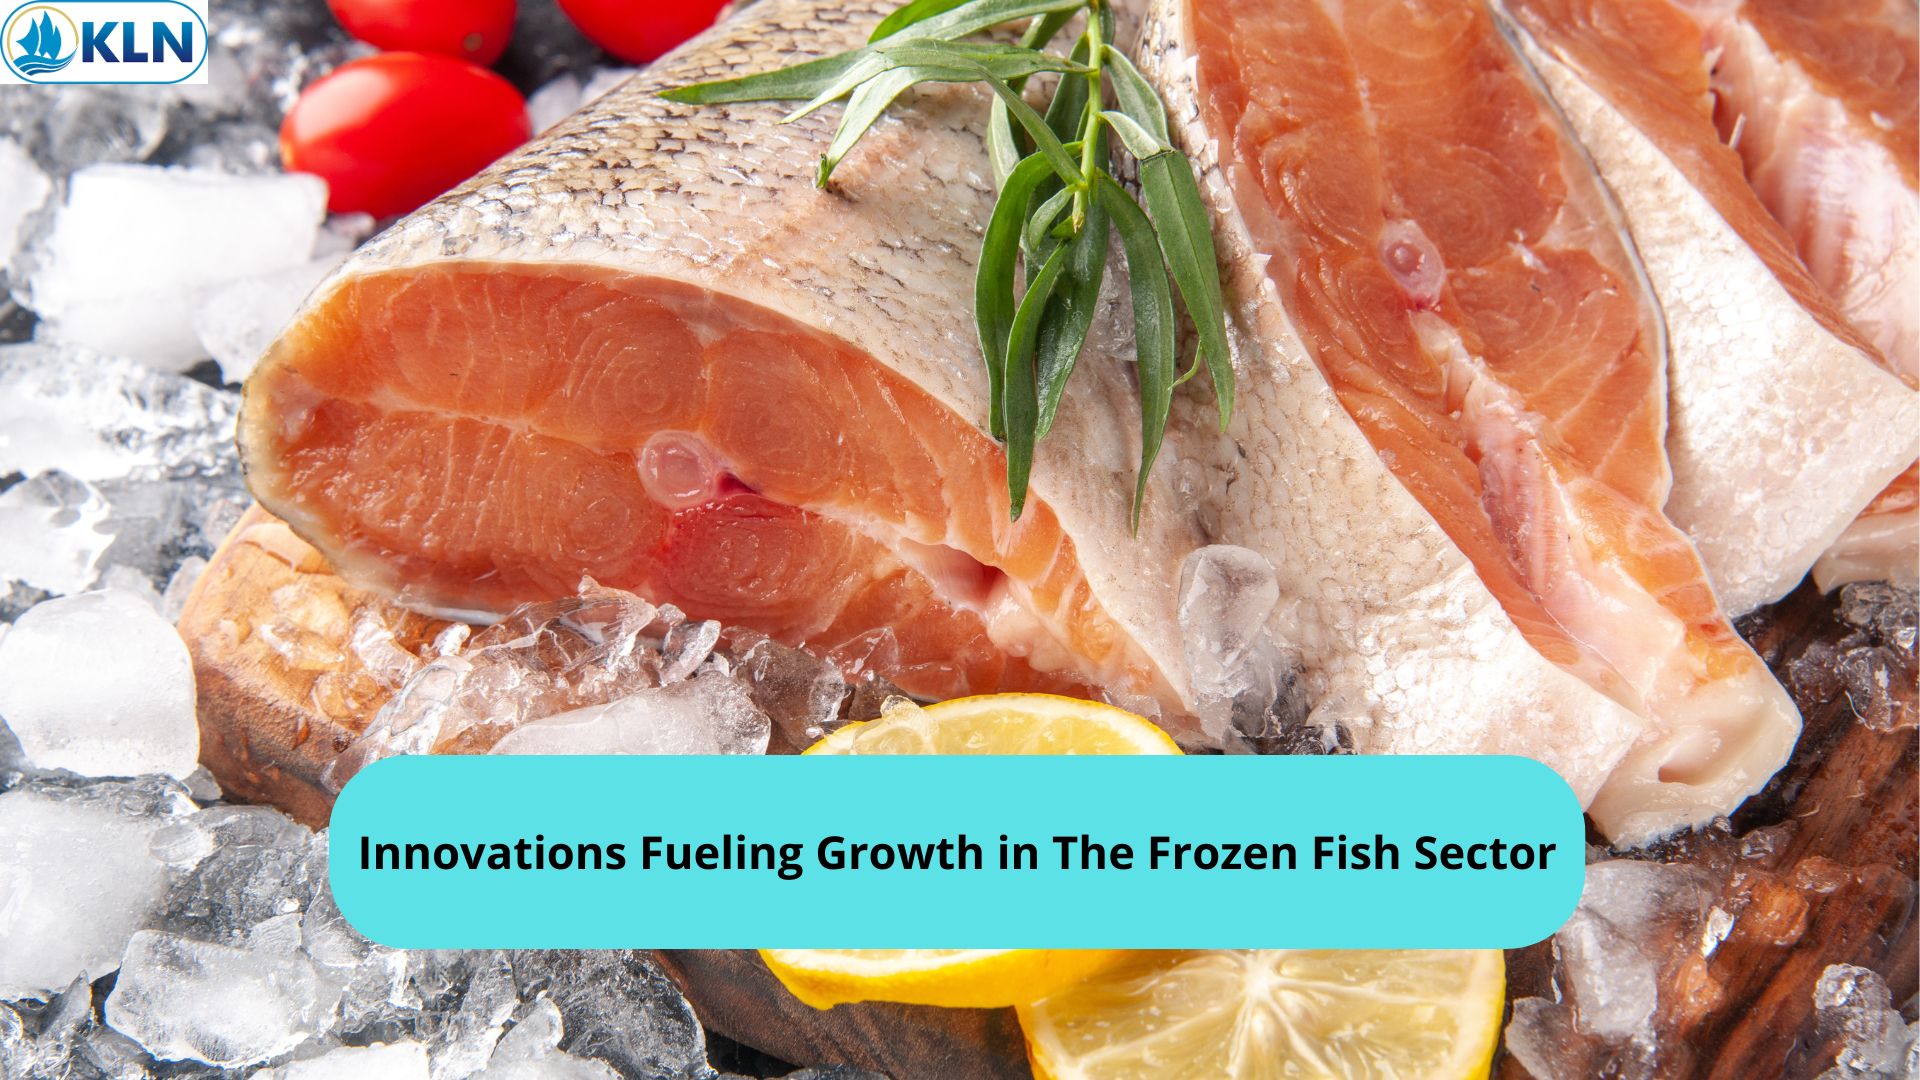 Innovations Fueling Growth in The Frozen Fish Sector